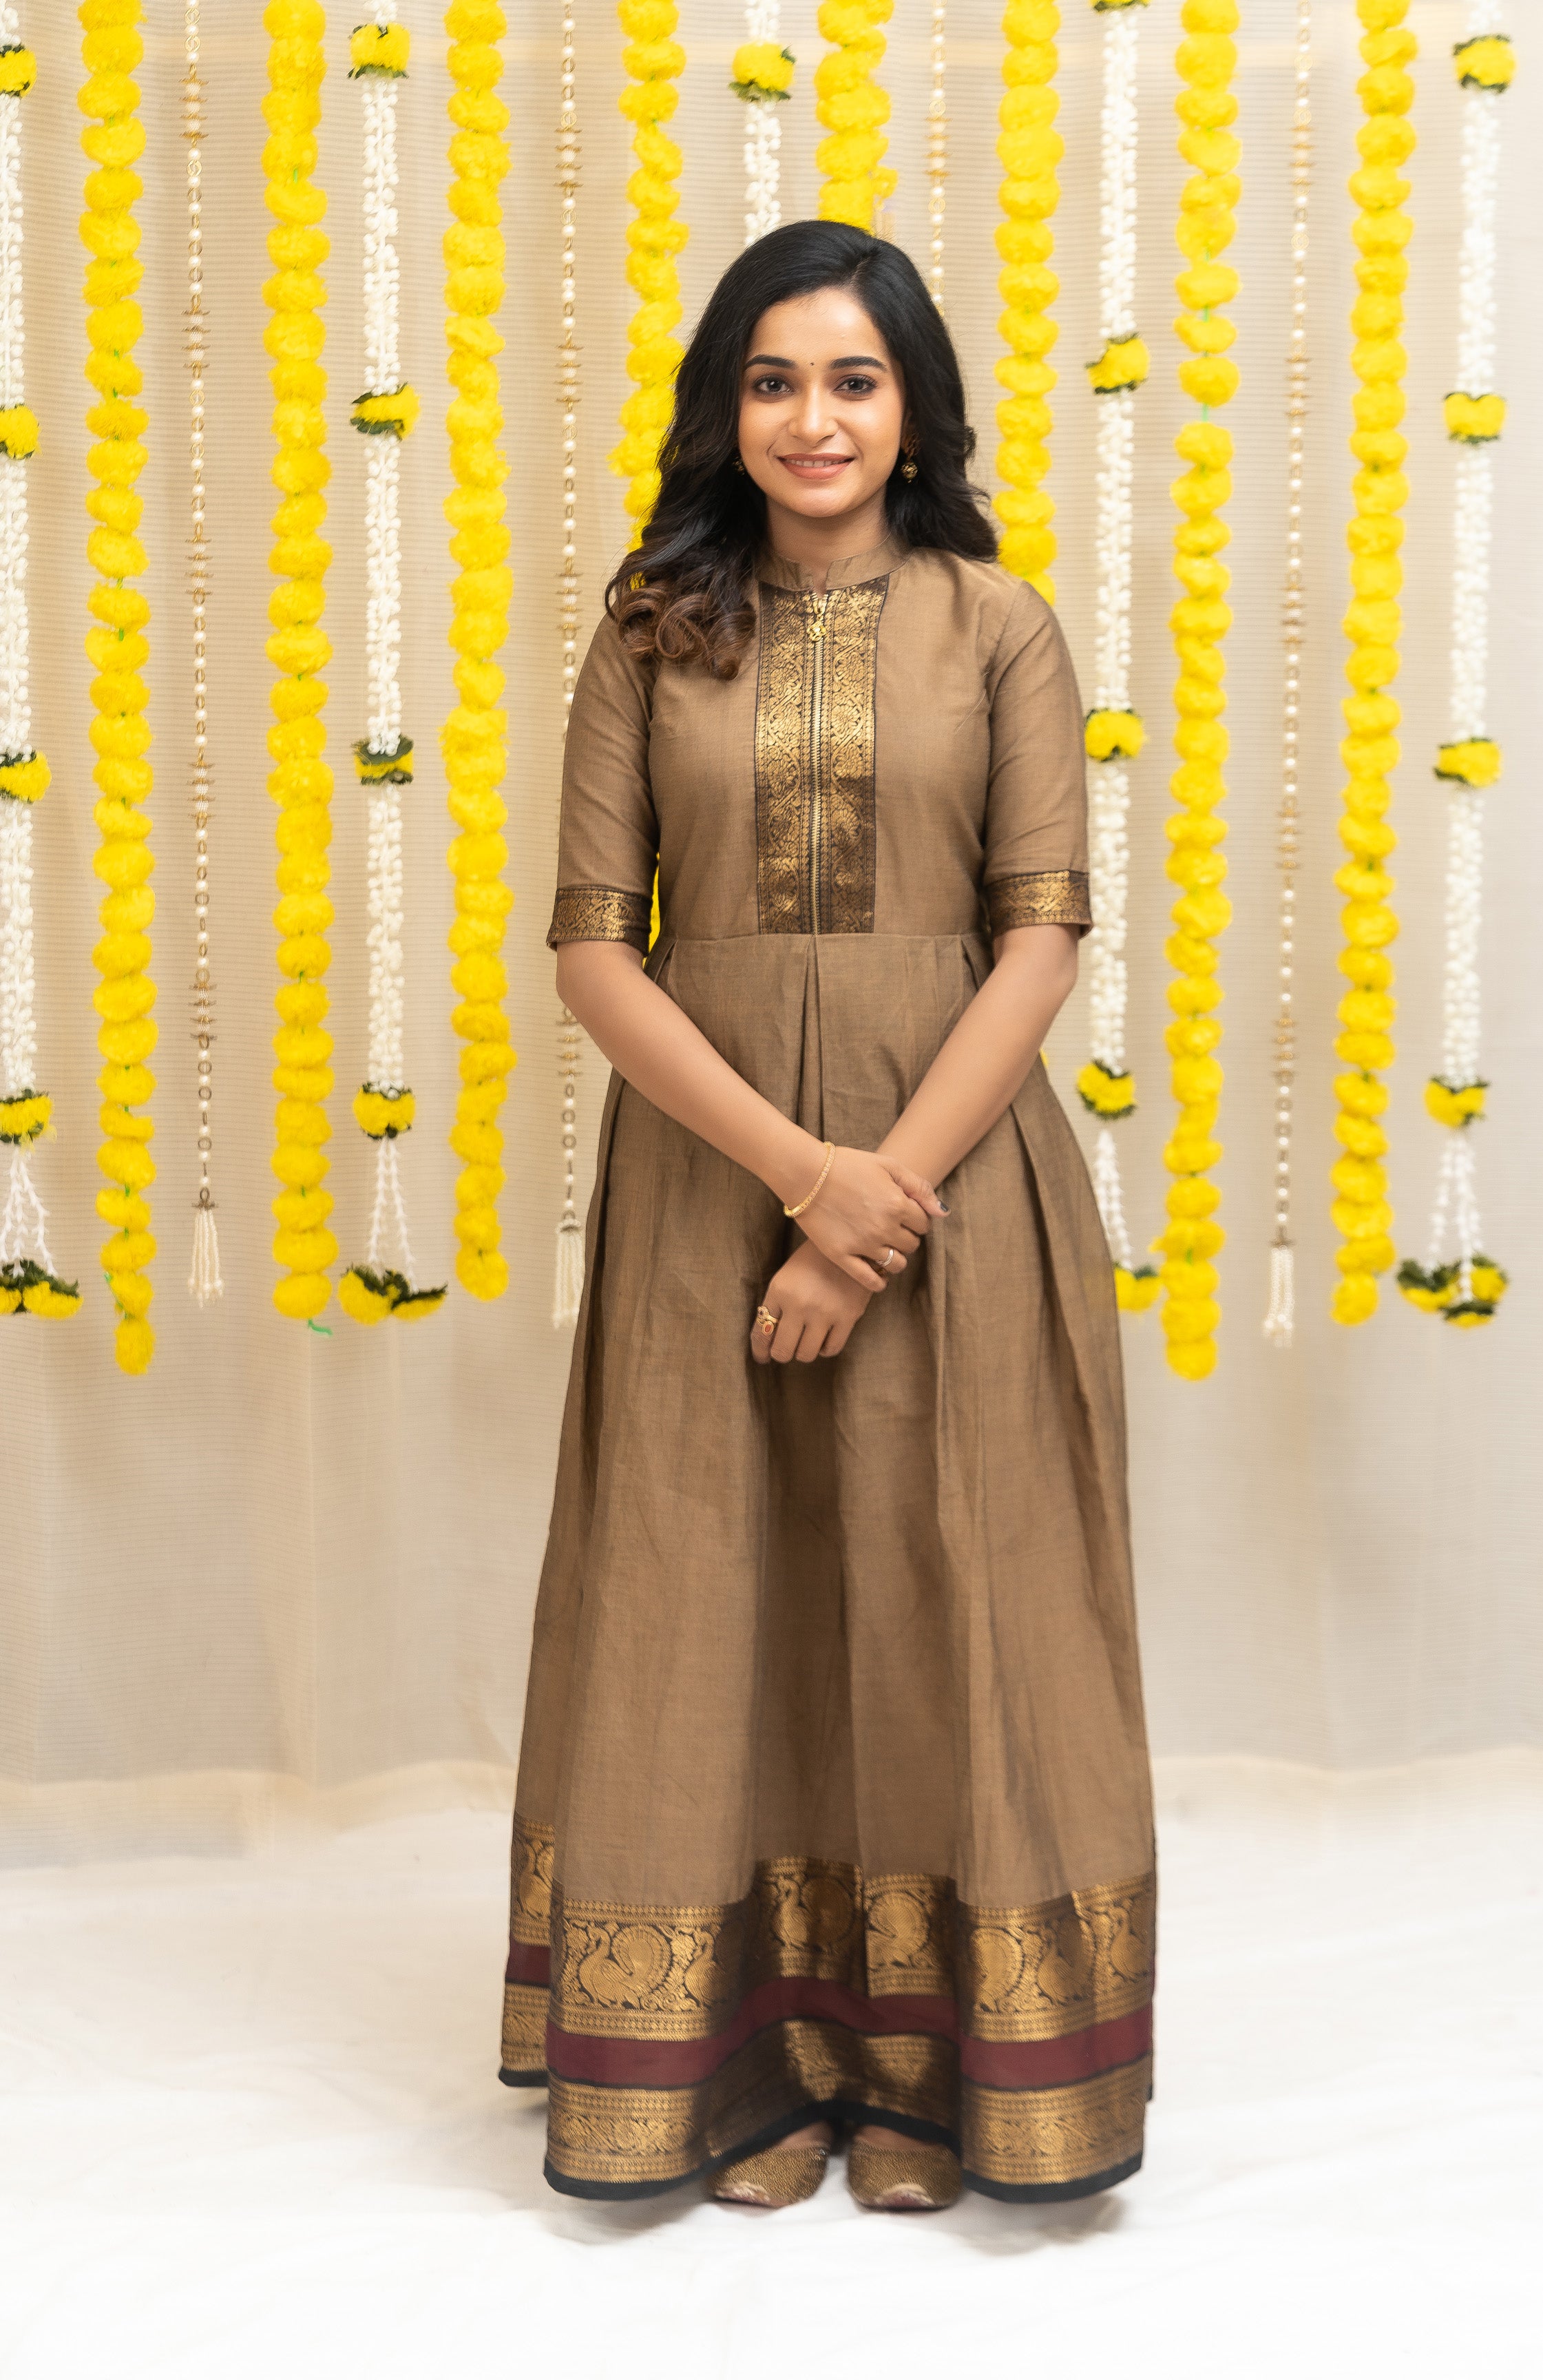 Look stylish in this maternity brown anarkali dress - crafted with Chettinad cotton and contrast trimmings. Get the modern ethnic look with this comfortable and casual simple dress.